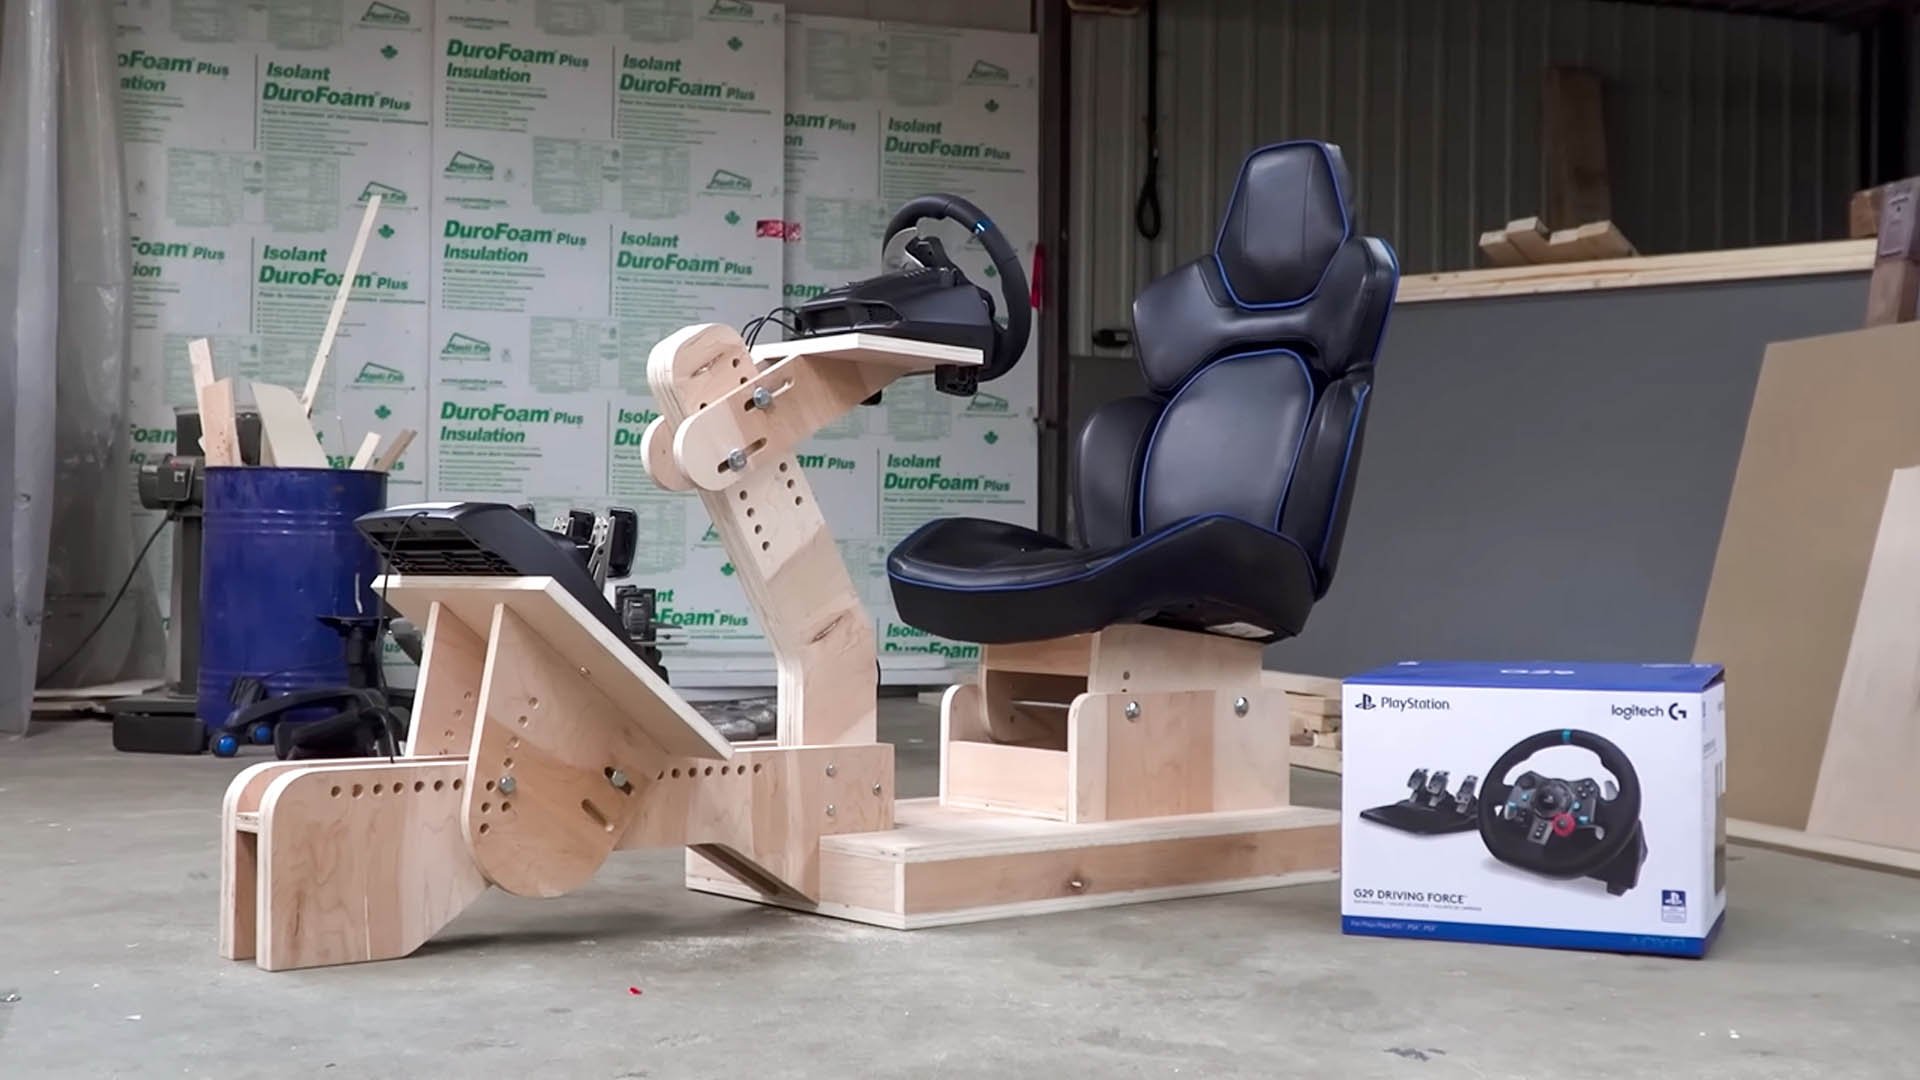 Homebuilt Racing Sim Does Almost Everything From Scratch